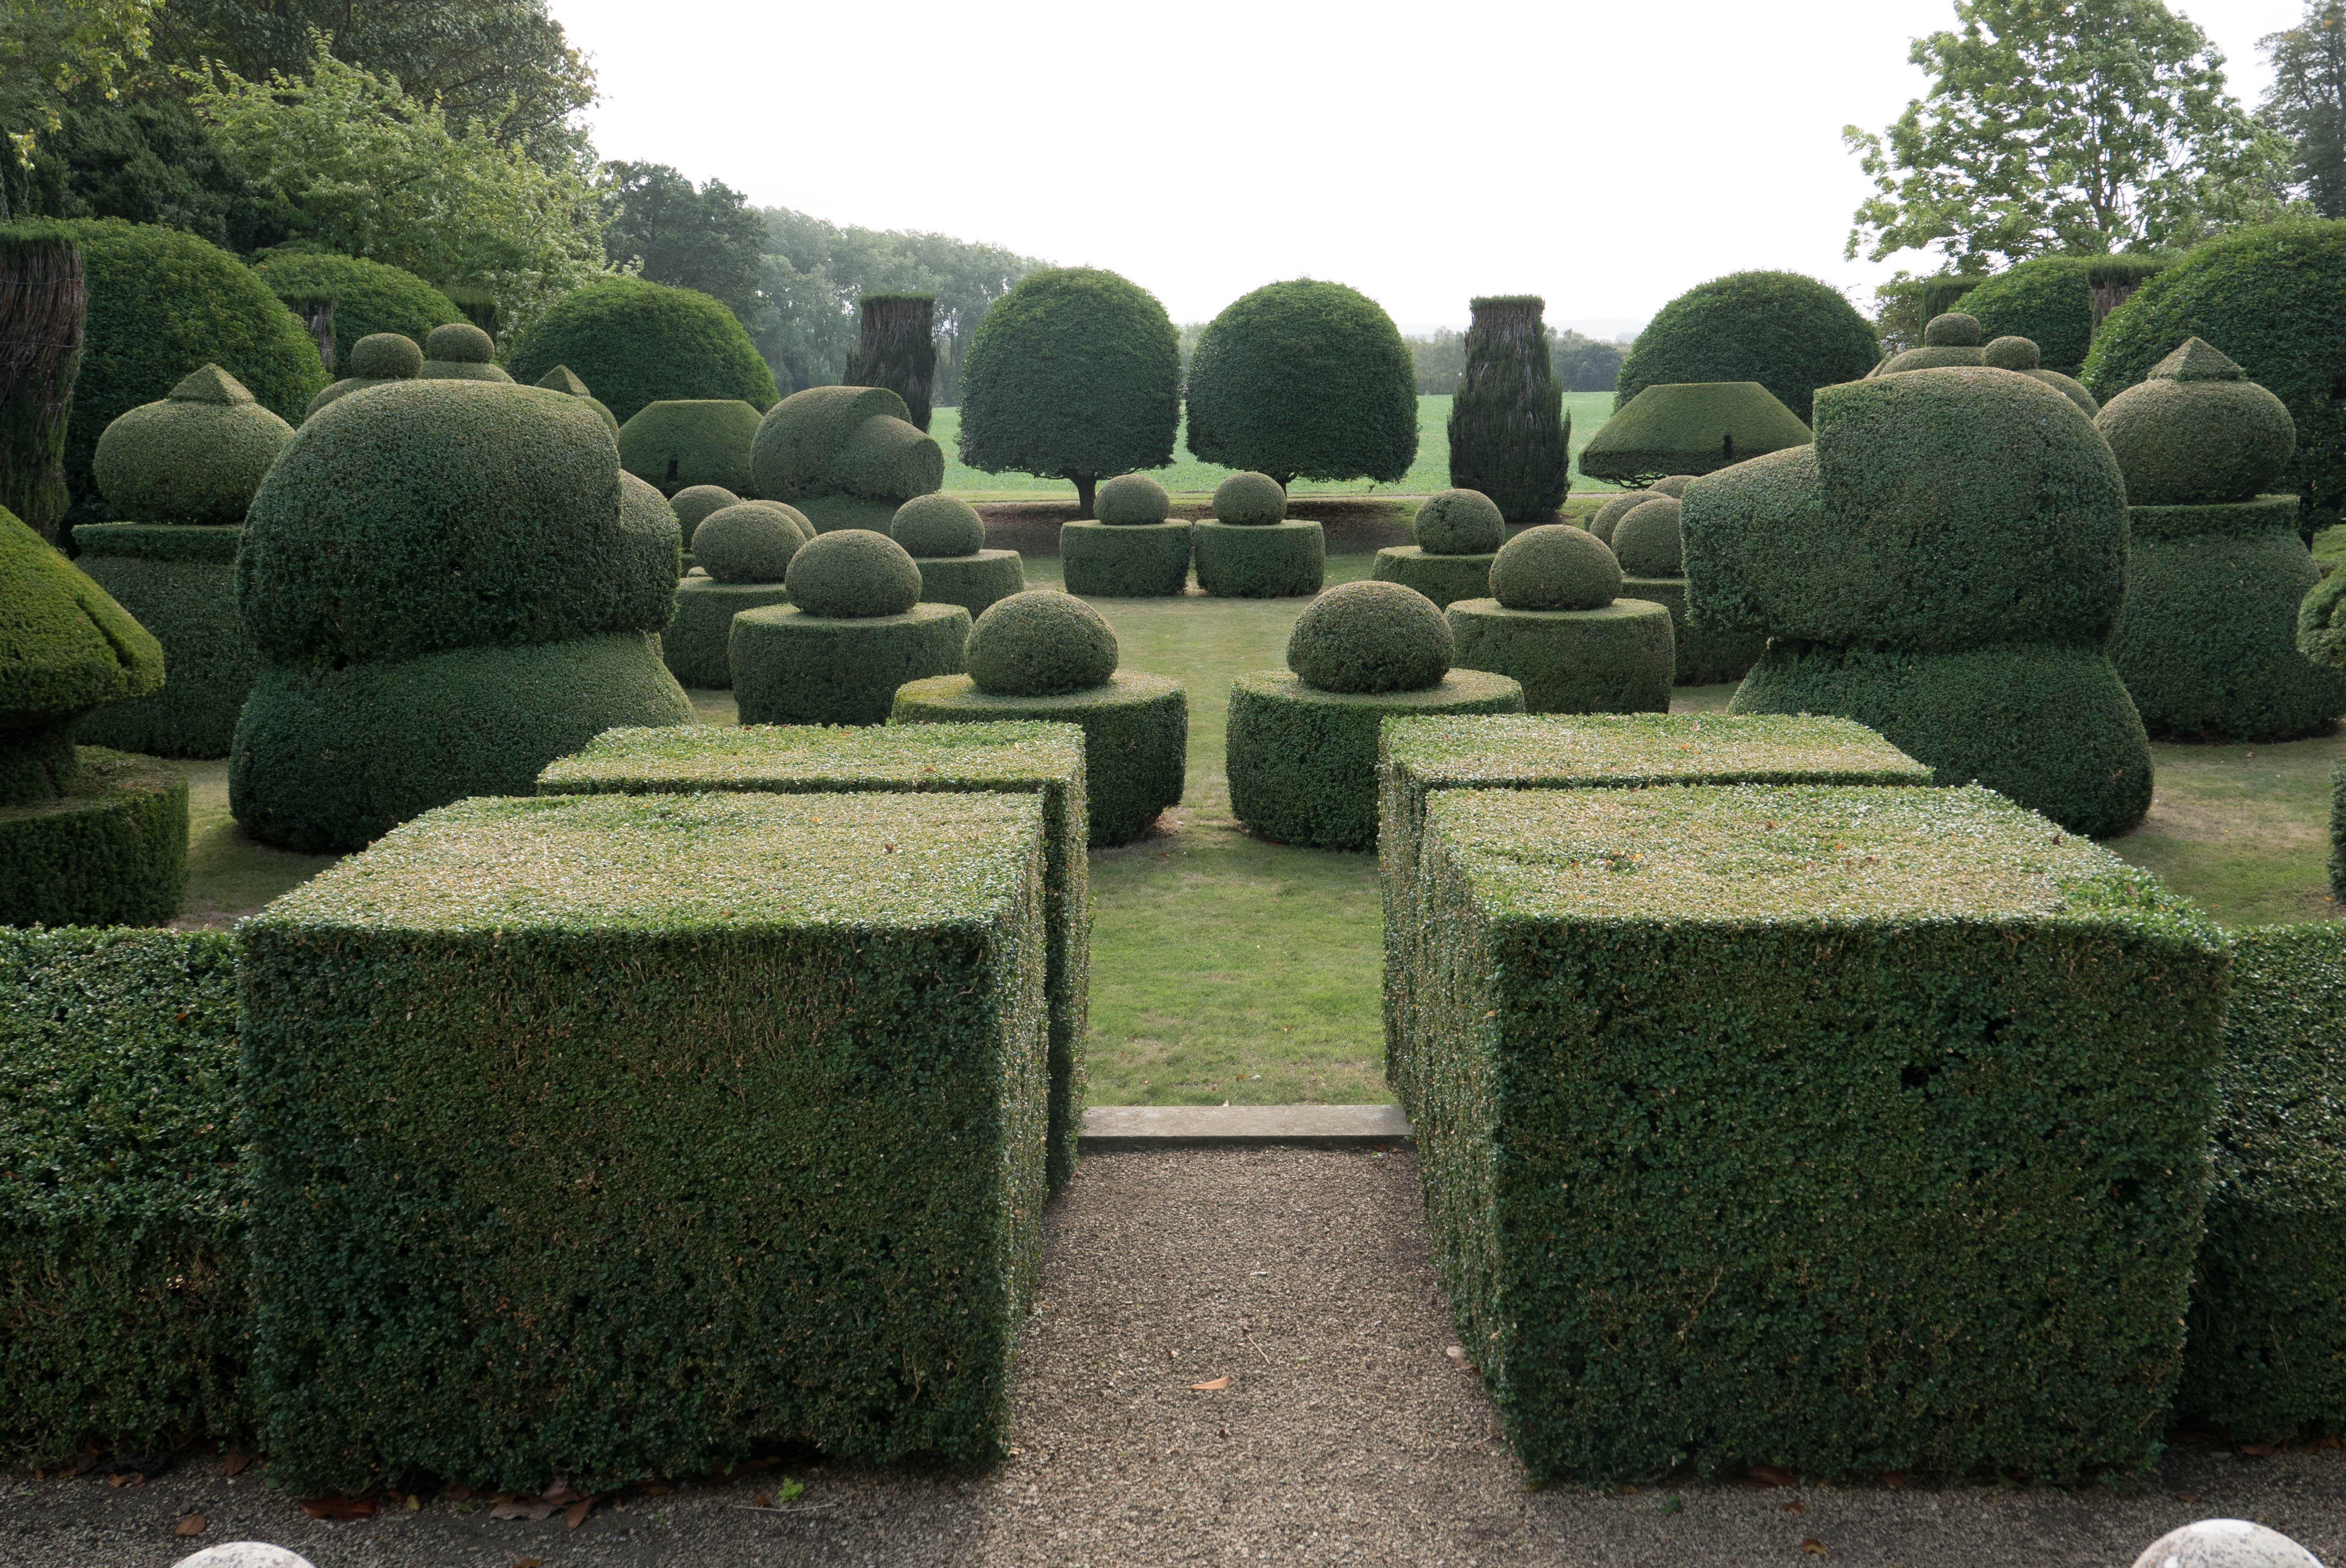 The topiary chess set at Haseley Court was one of many things I admired there.